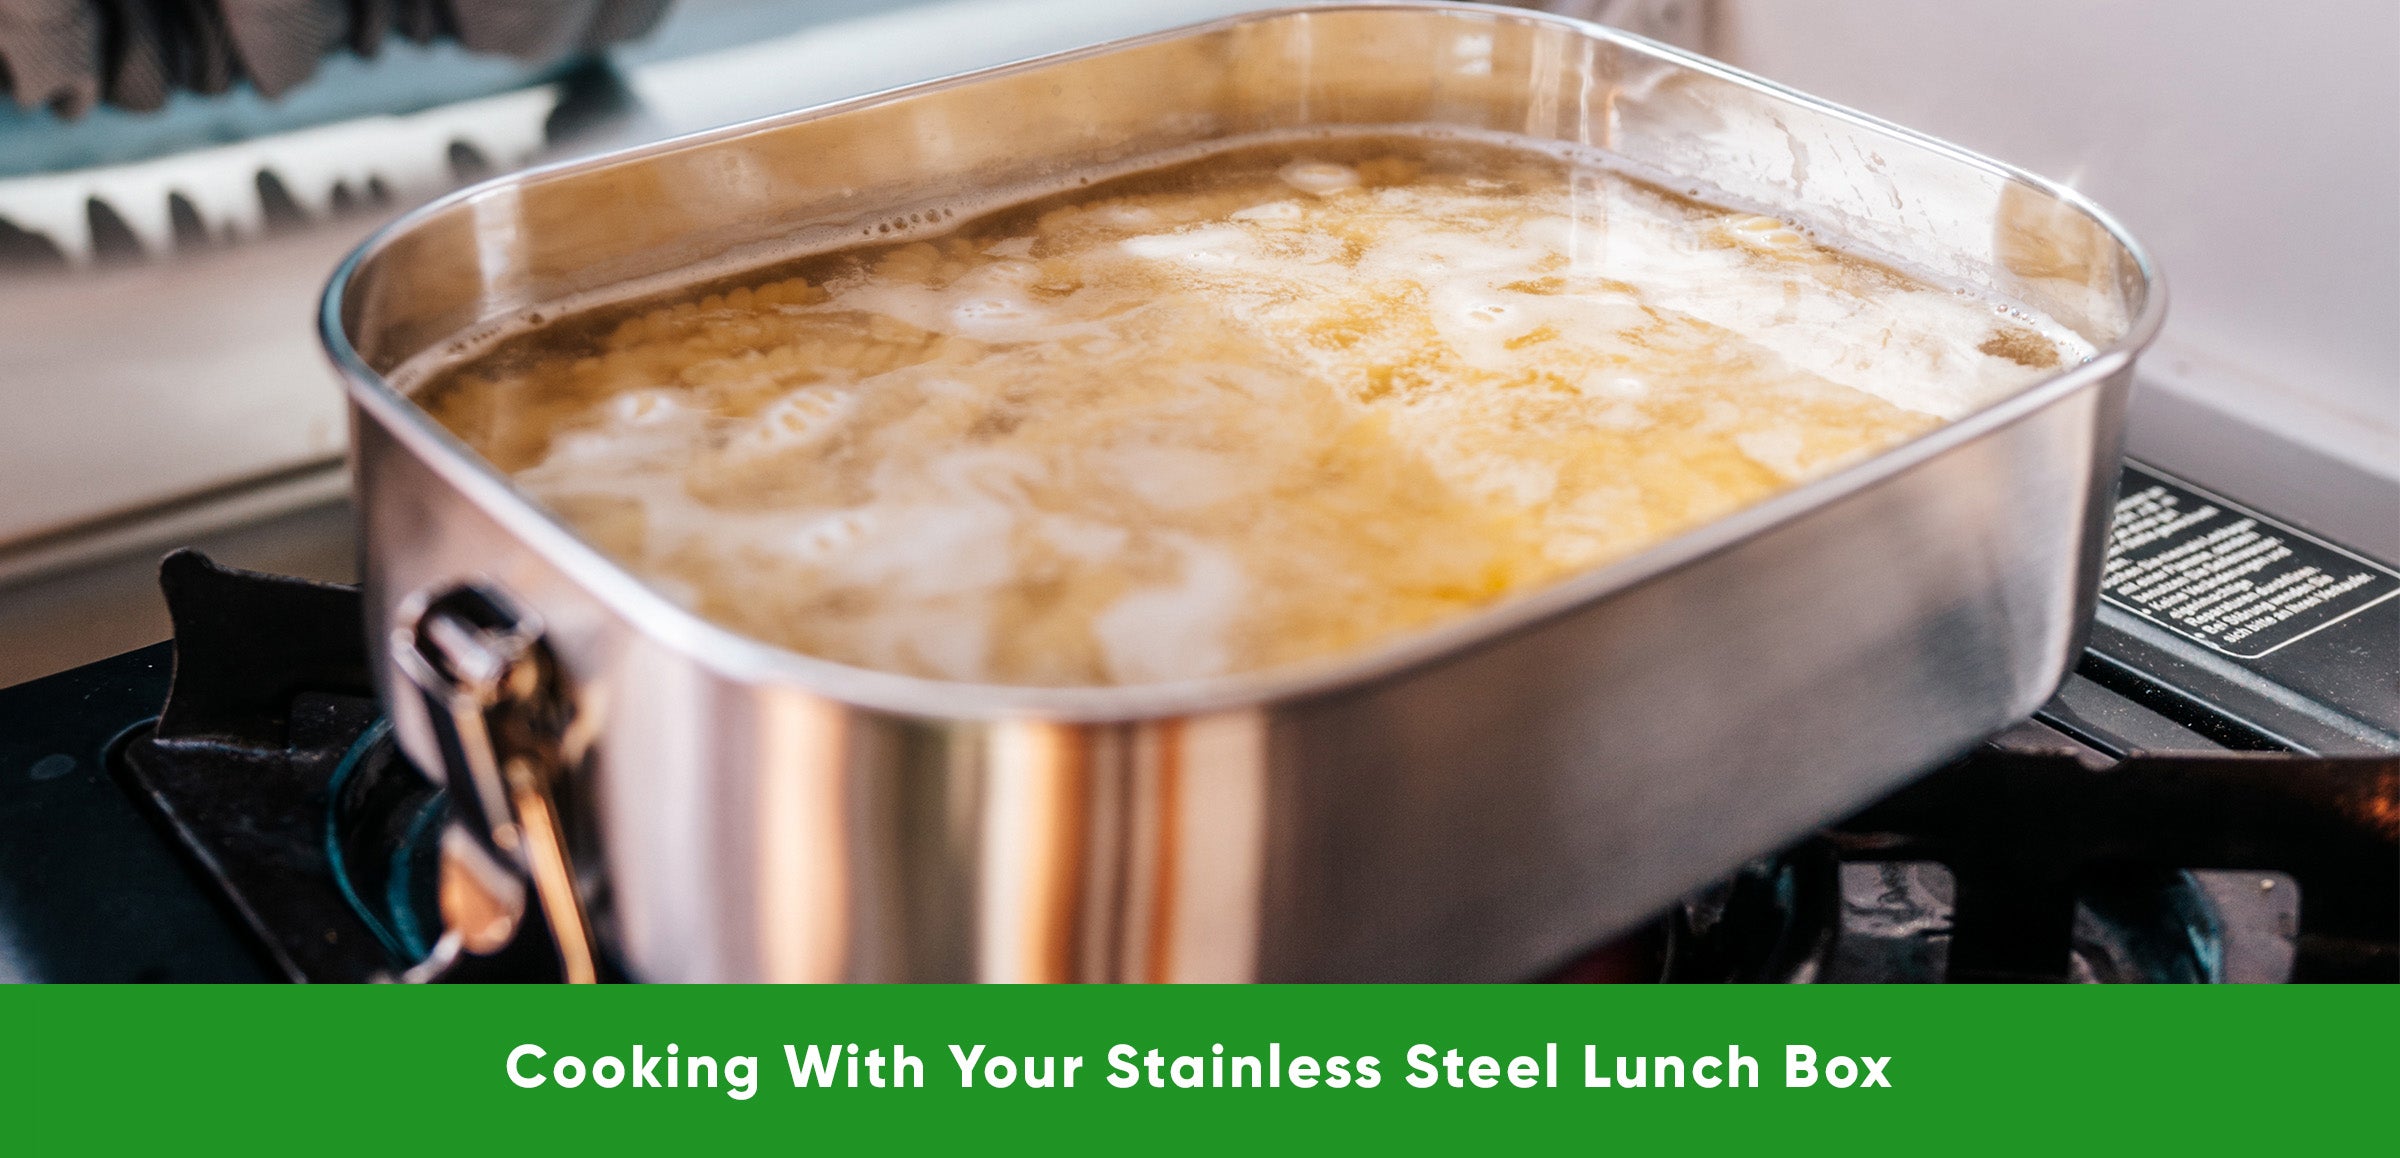 Pasta being cooked in Blockhuette stainless steel lunchbox